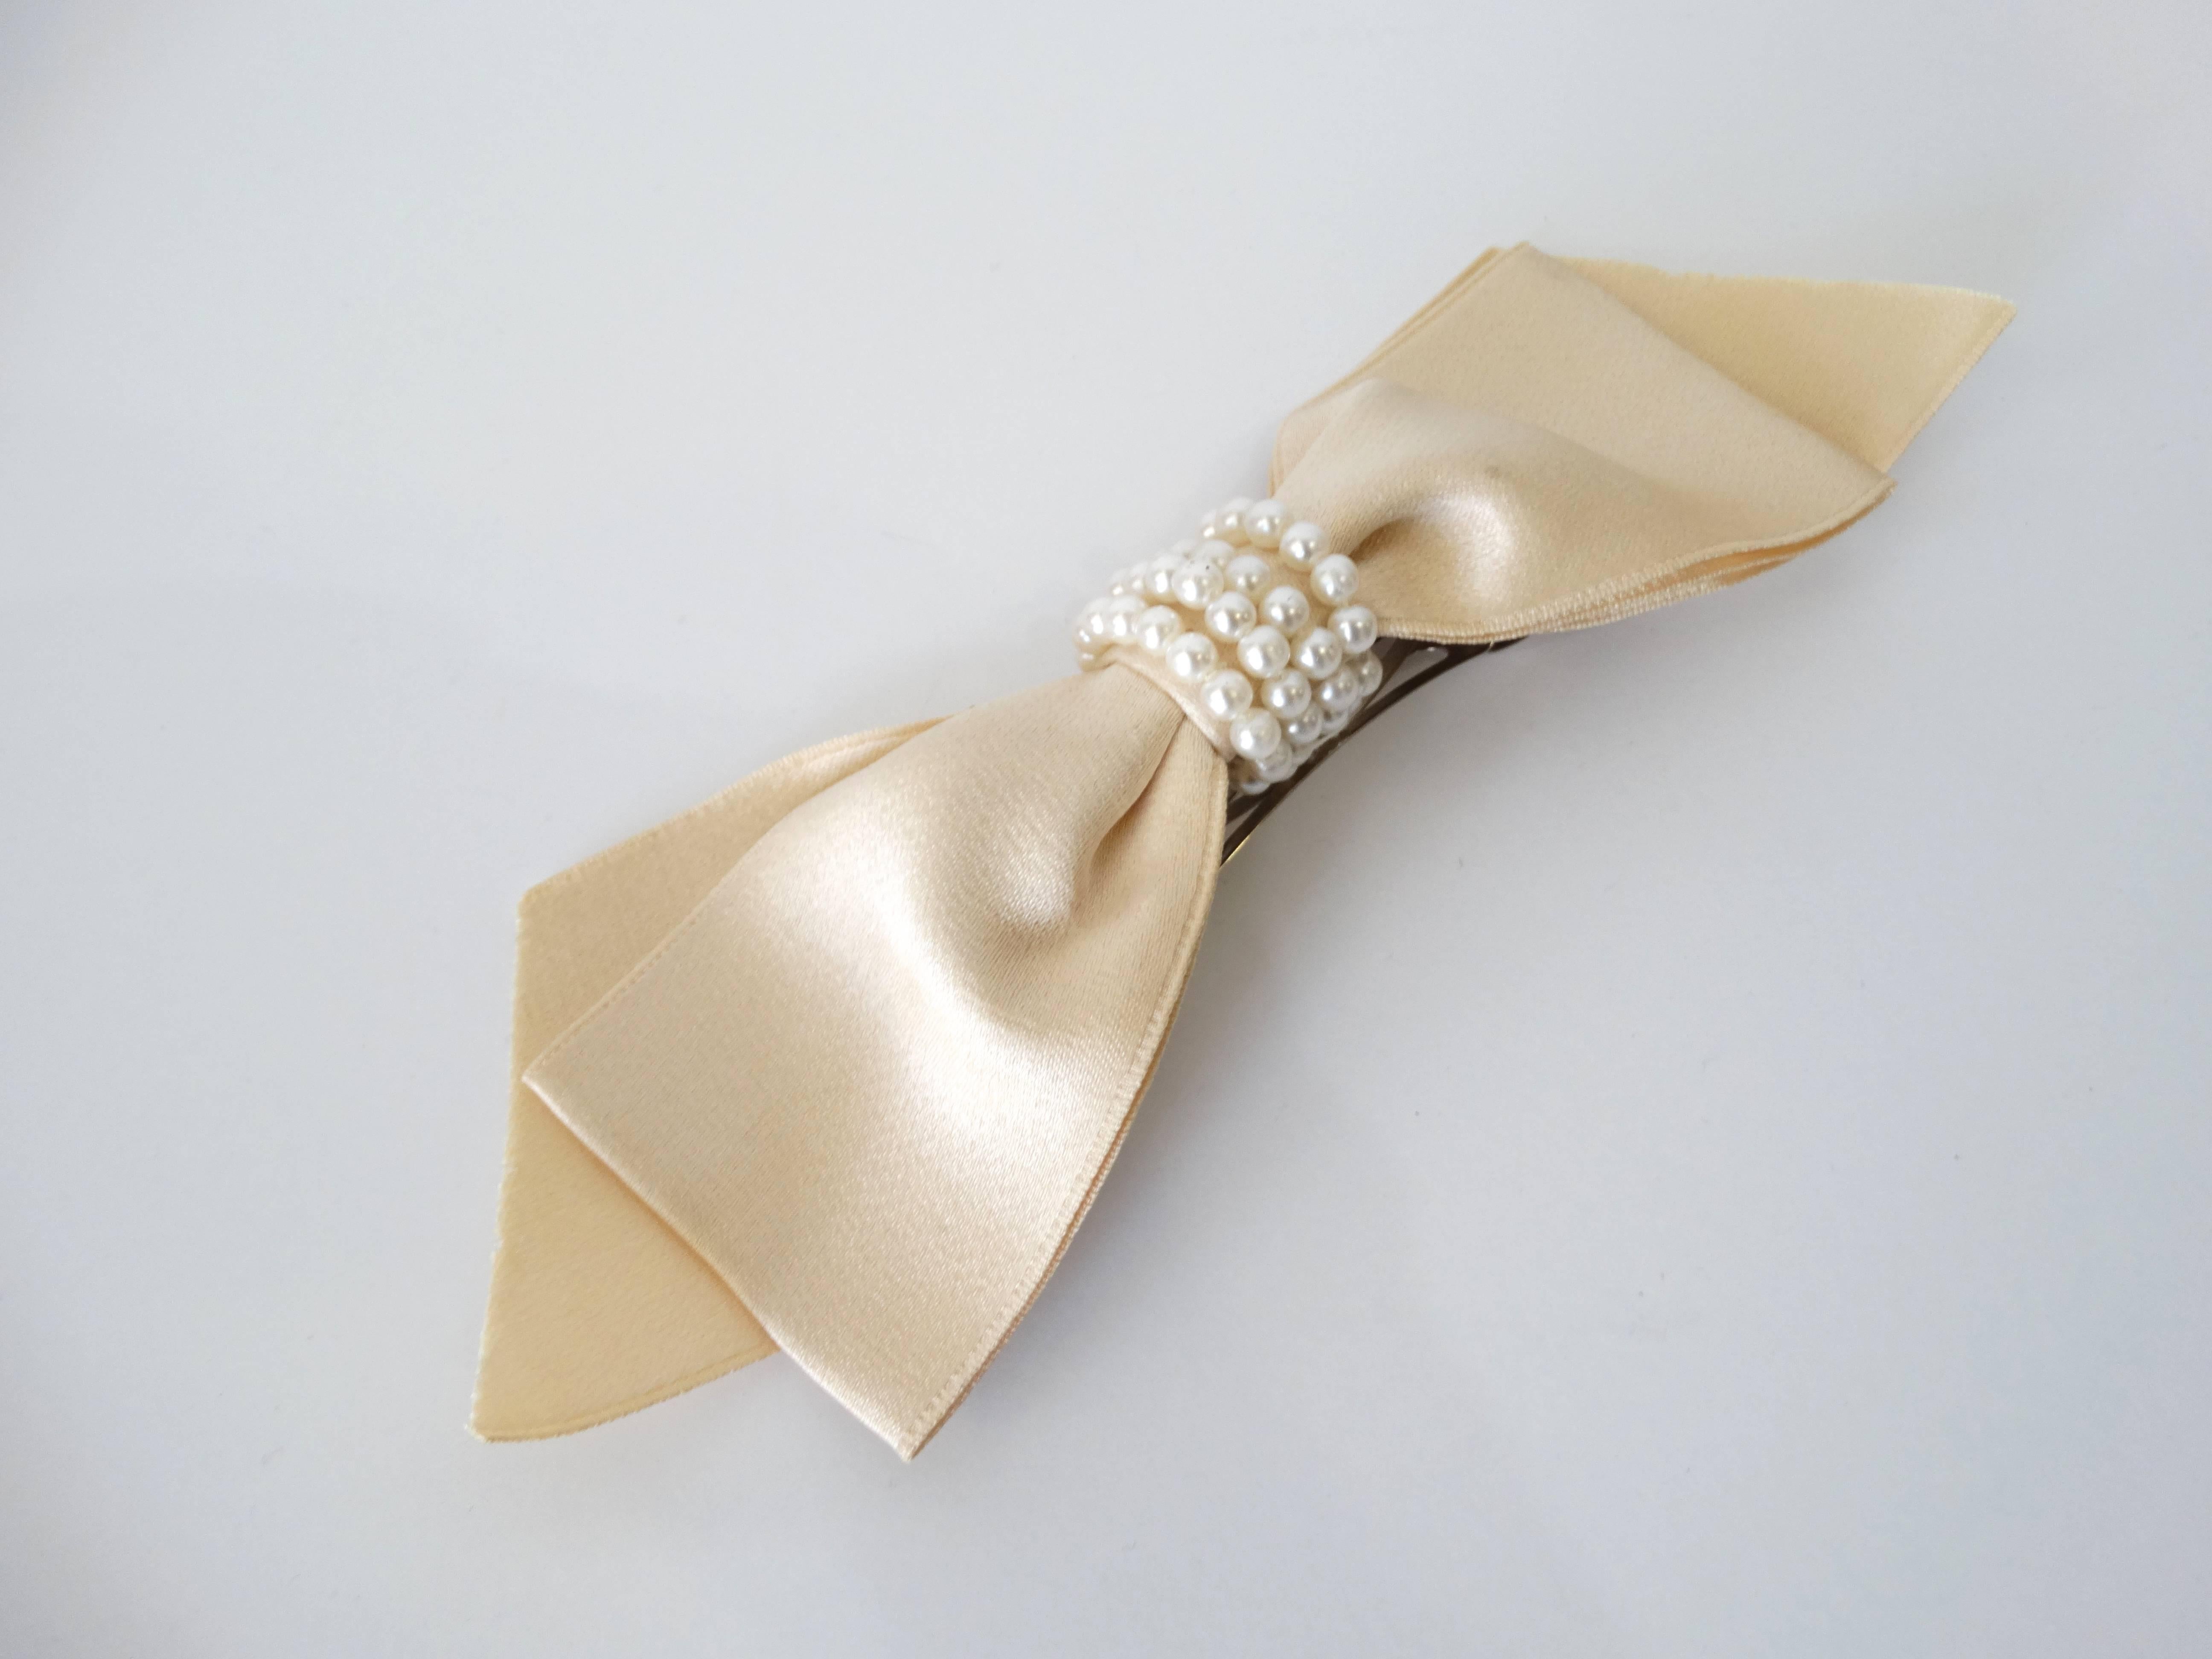 Beige 1980s Chanel Cream Satin Bow Barrette with Pearls 